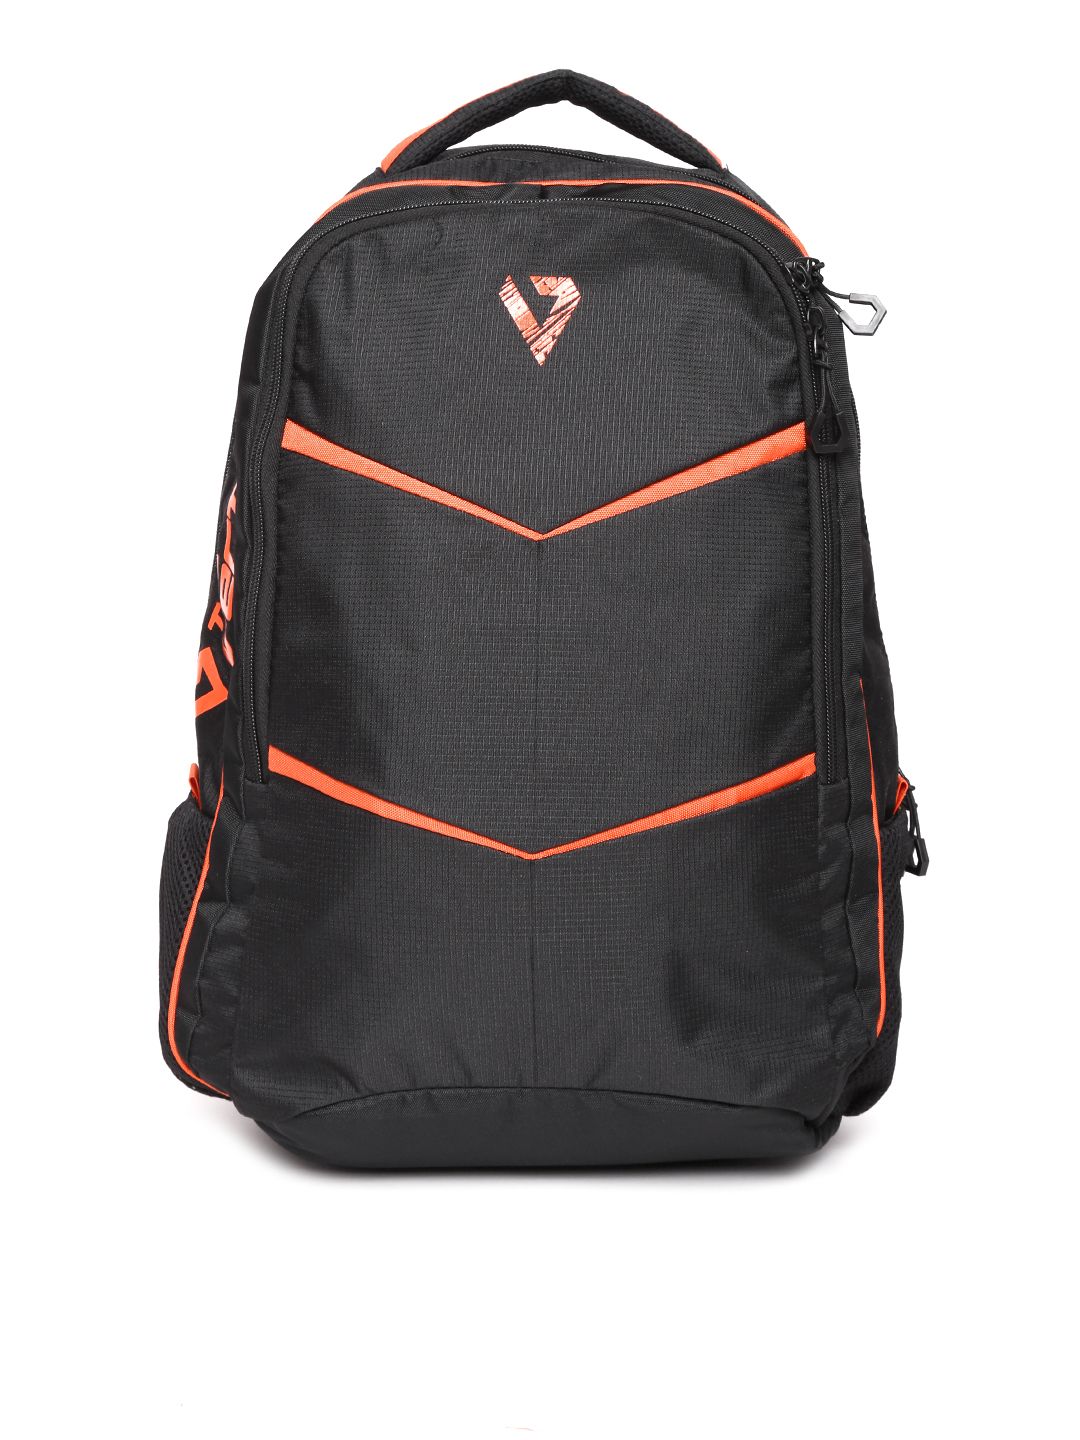 THe VerTicaL Unisex Black Textured Laptop Backpack Price in India